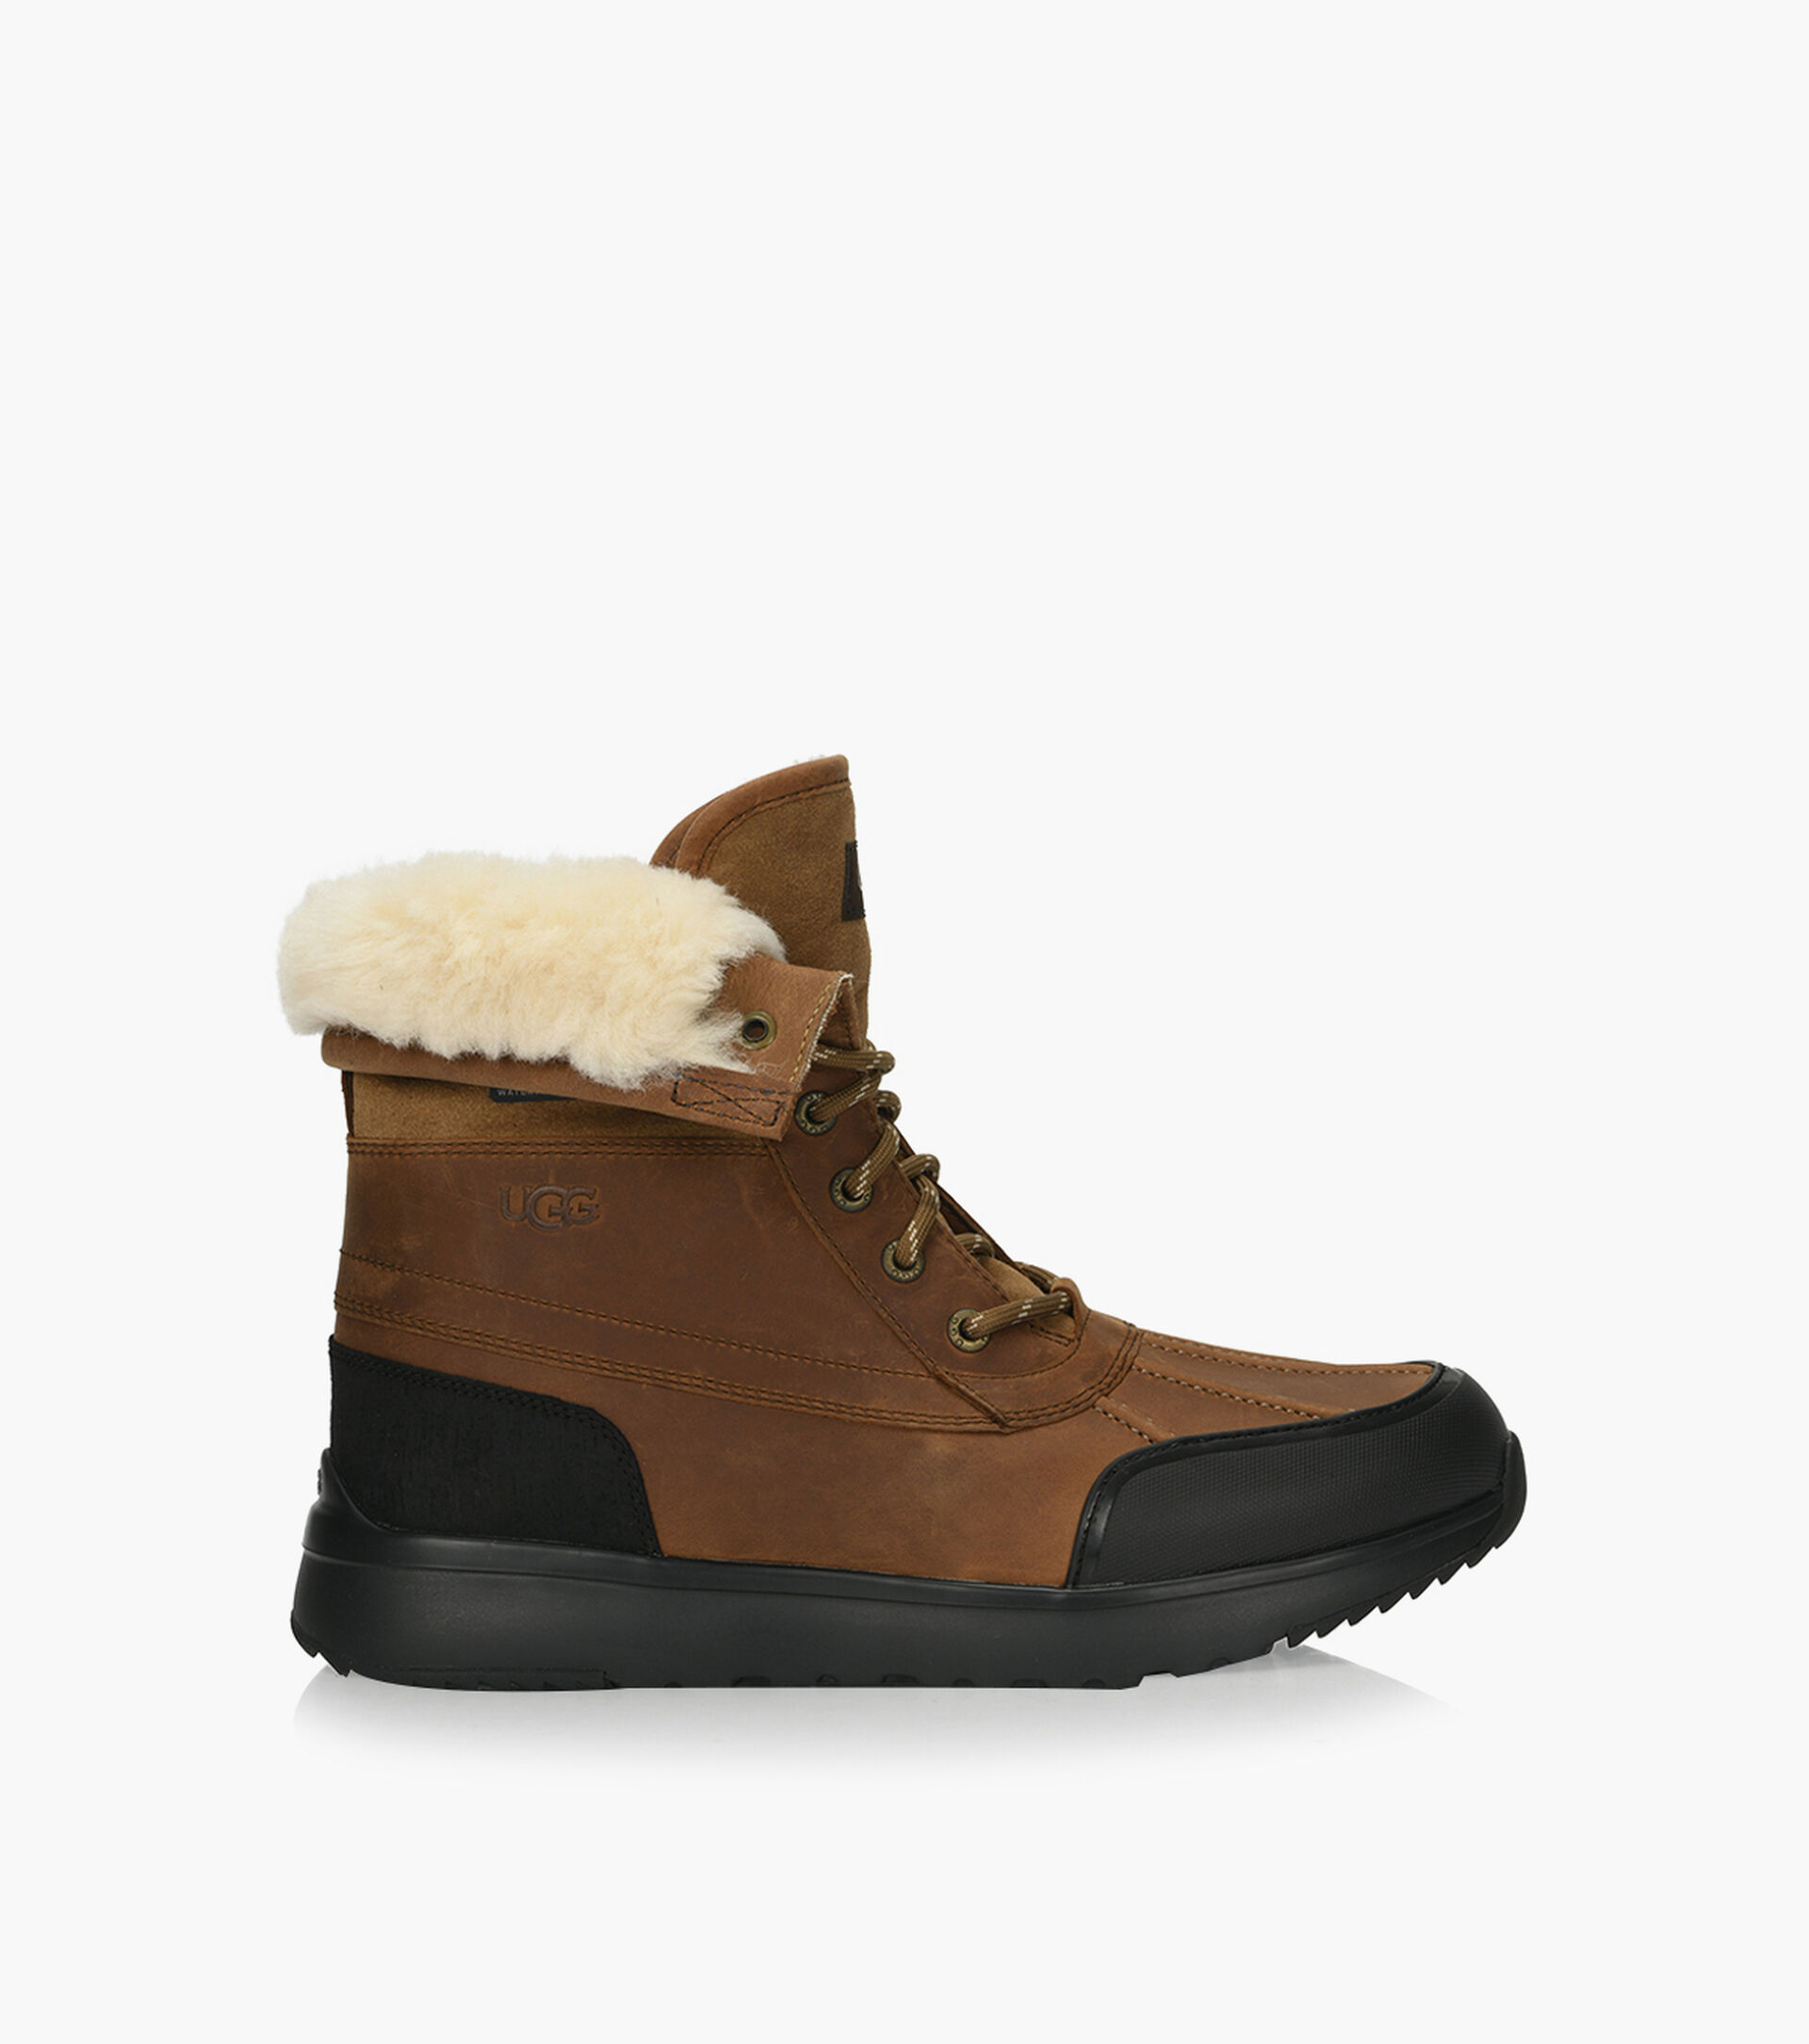 UGG ELIASSON - Leather | Browns Shoes